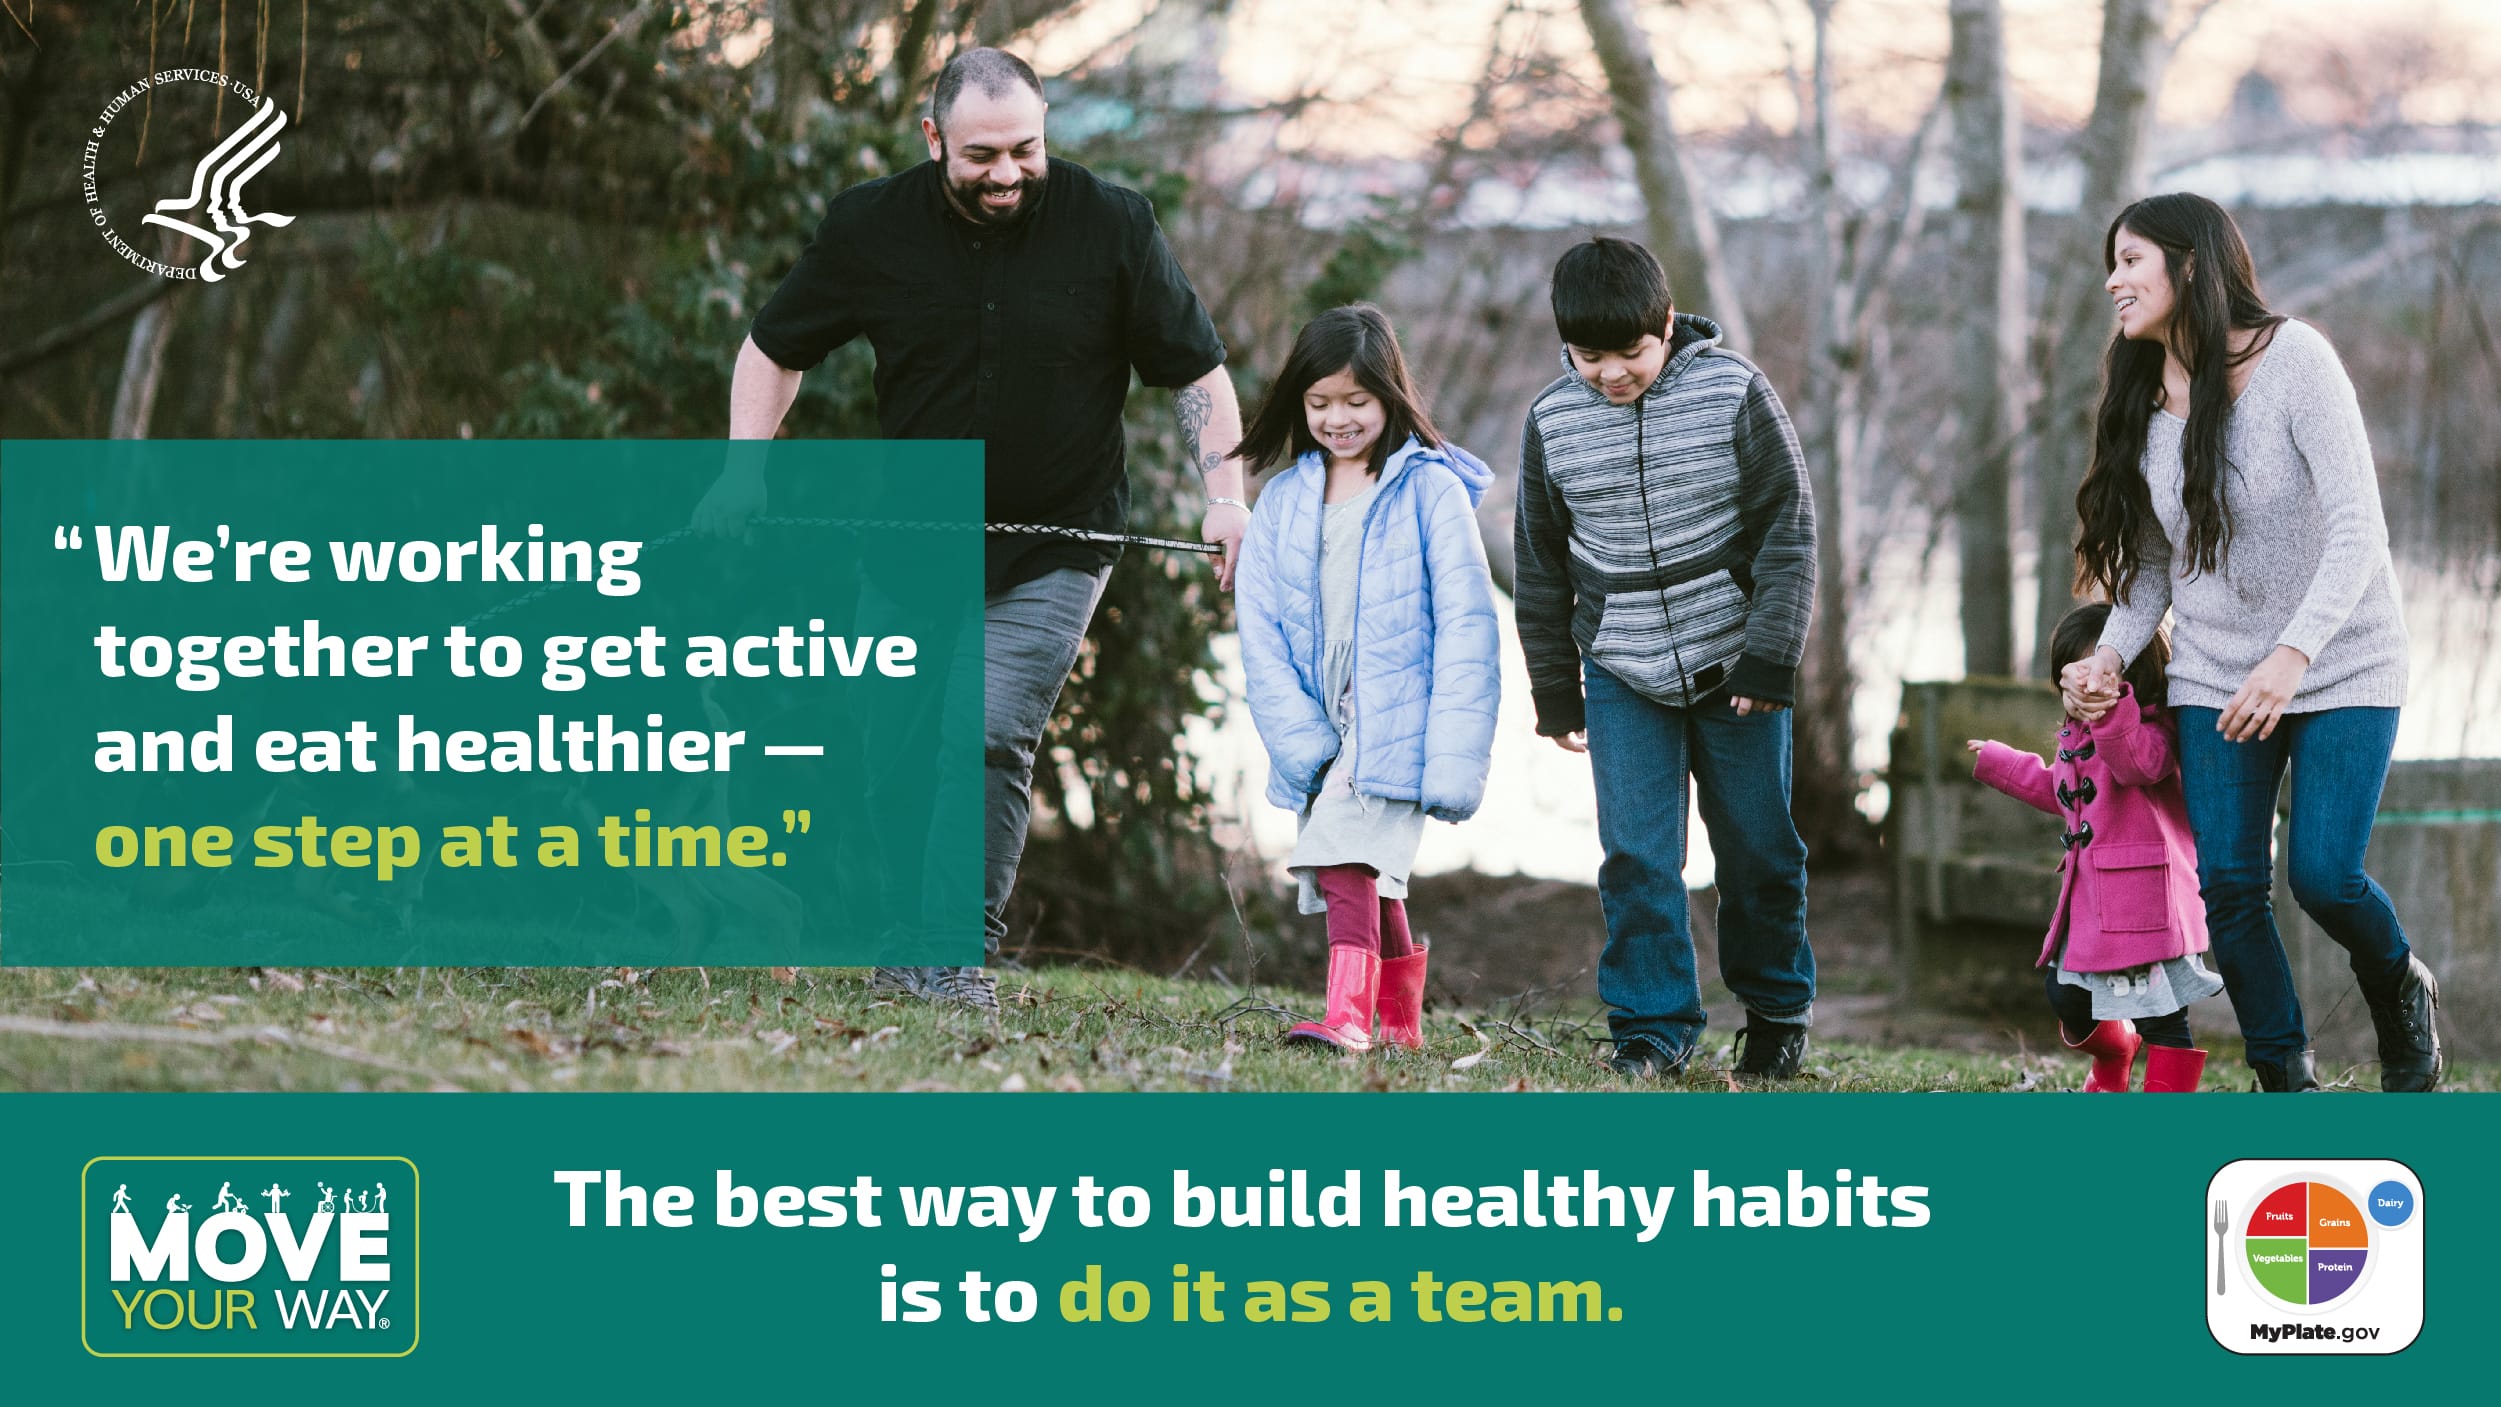 A family walking in a park alongside a quote: "We're working together to get active and eat healthier - one step at a time."